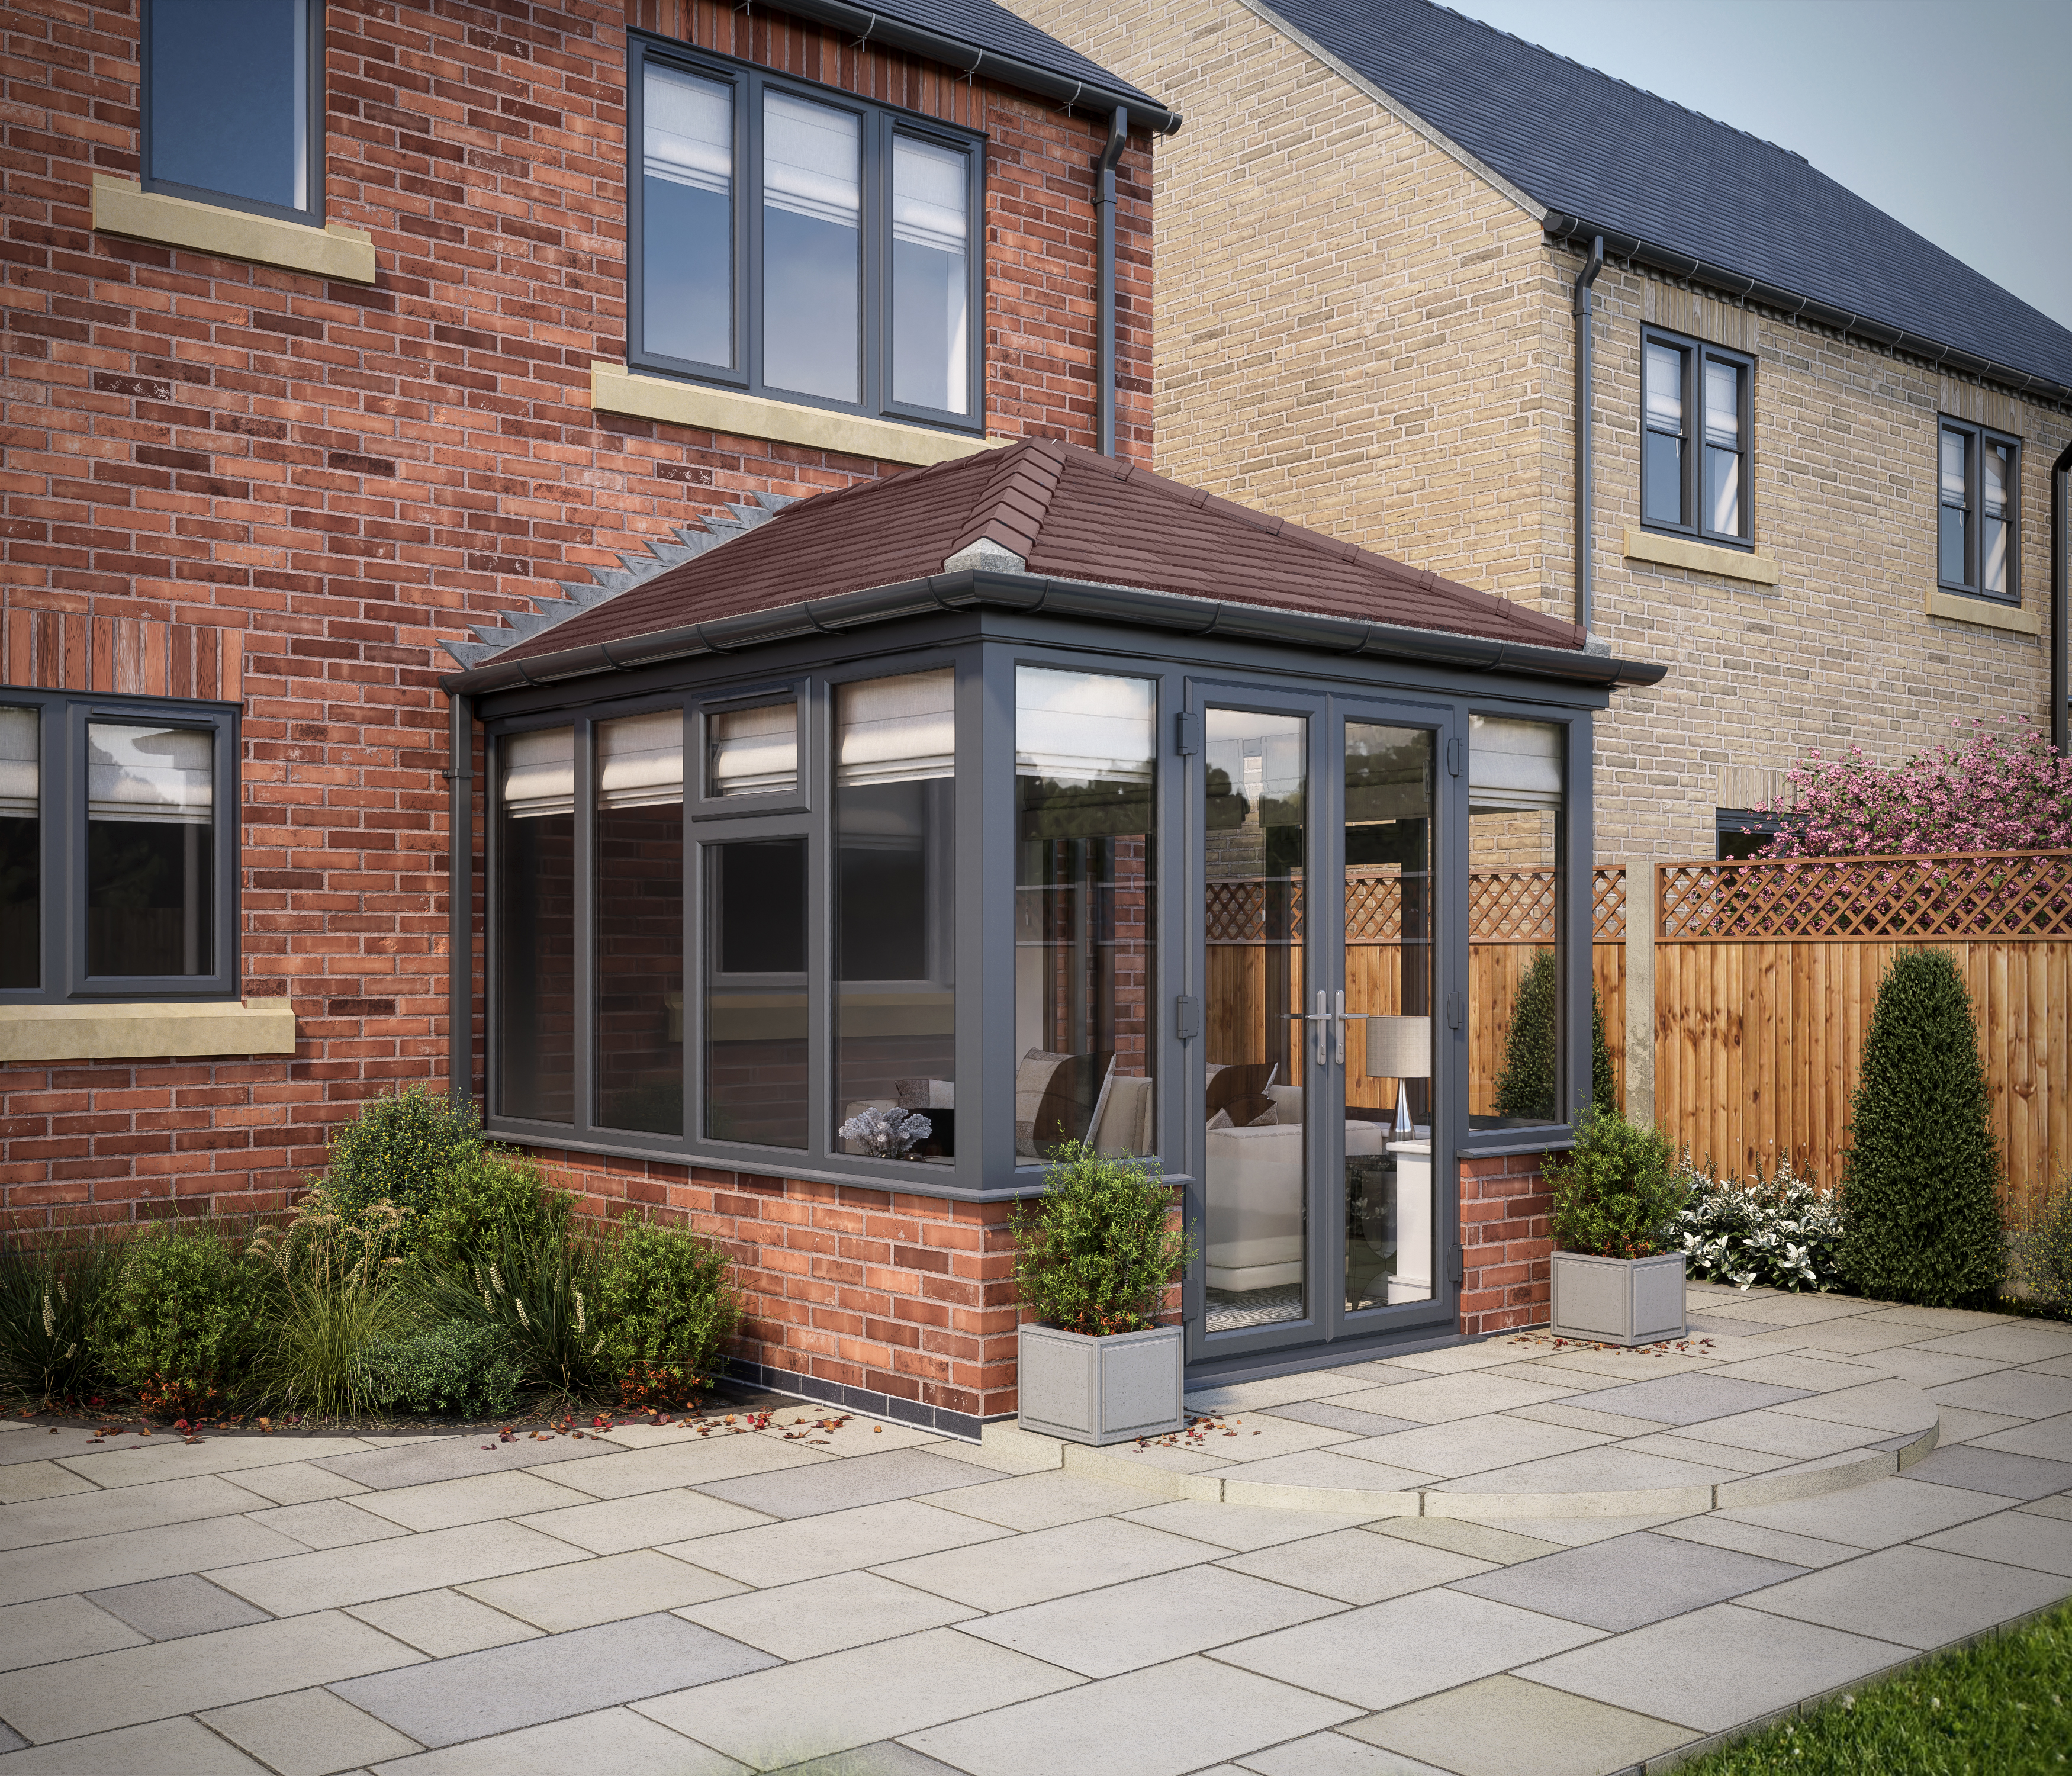 Image of SOLid Roof Edwardian Conservatory Grey Frames Dwarf Wall with Rustic Brown Tiles - 13 x 13ft